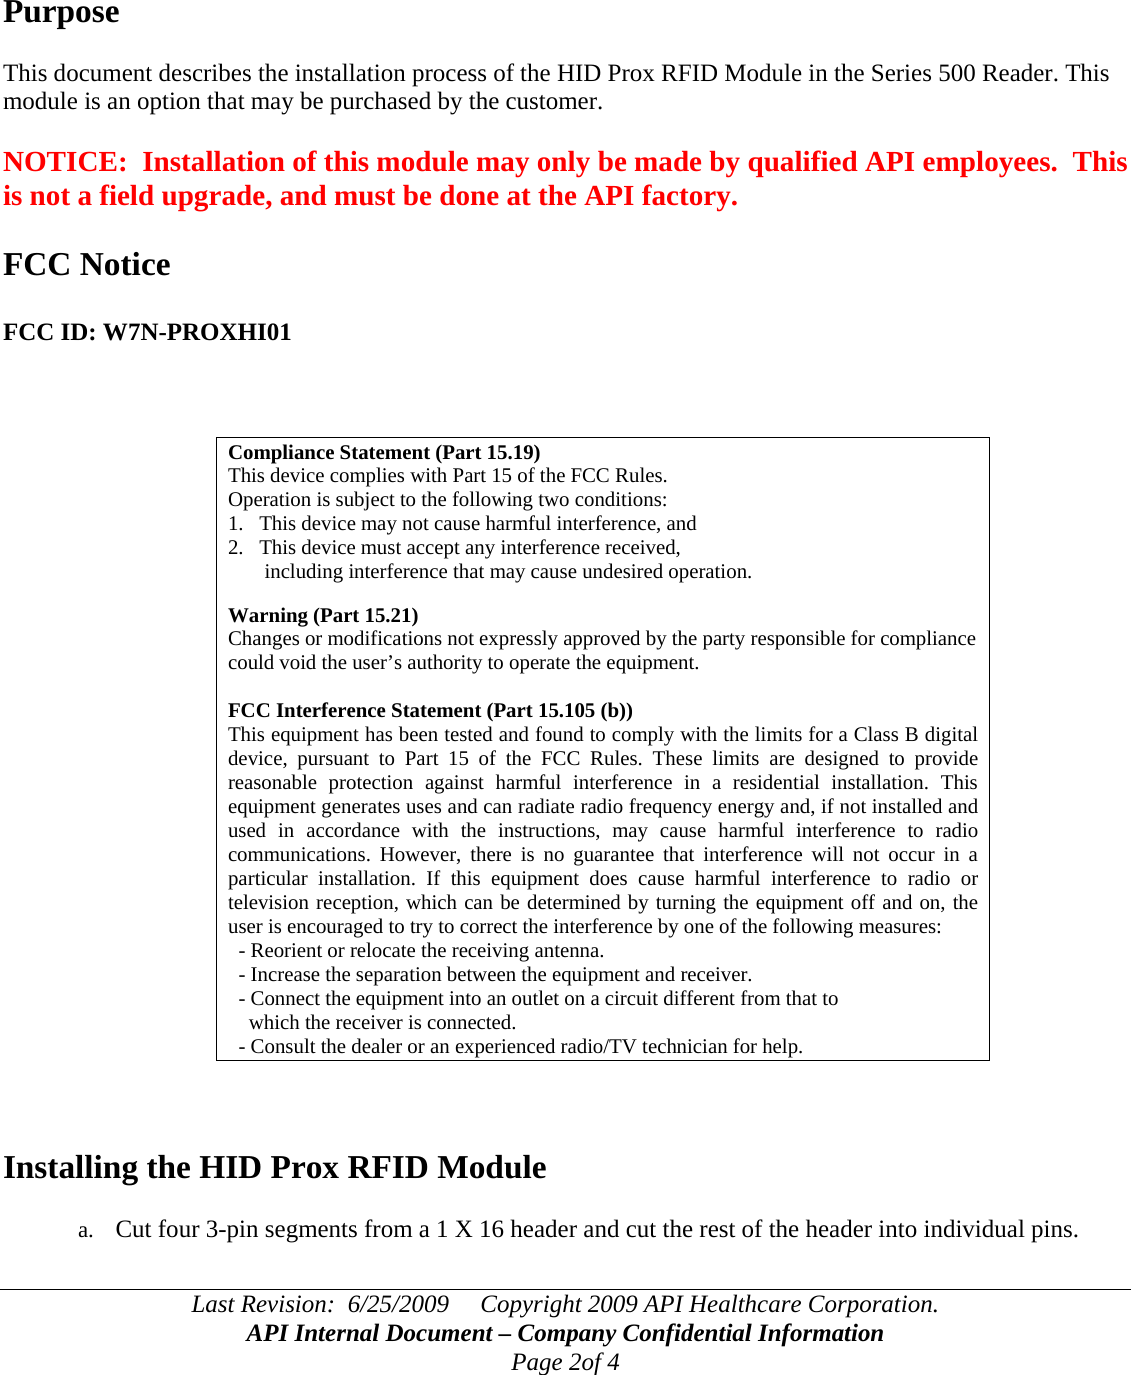 Last Revision:  6/25/2009     Copyright 2009 API Healthcare Corporation. API Internal Document – Company Confidential Information Page 2of 4     Purpose  This document describes the installation process of the HID Prox RFID Module in the Series 500 Reader. This module is an option that may be purchased by the customer.  NOTICE:  Installation of this module may only be made by qualified API employees.  This is not a field upgrade, and must be done at the API factory.  FCC Notice  FCC ID: W7N-PROXHI01    Compliance Statement (Part 15.19) This device complies with Part 15 of the FCC Rules.  Operation is subject to the following two conditions:  1.   This device may not cause harmful interference, and  2.   This device must accept any interference received,         including interference that may cause undesired operation.  Warning (Part 15.21) Changes or modifications not expressly approved by the party responsible for compliance could void the user’s authority to operate the equipment.  FCC Interference Statement (Part 15.105 (b)) This equipment has been tested and found to comply with the limits for a Class B digital device, pursuant to Part 15 of the FCC Rules. These limits are designed to provide reasonable protection against harmful interference in a residential installation. This equipment generates uses and can radiate radio frequency energy and, if not installed and used in accordance with the instructions, may cause harmful interference to radio communications. However, there is no guarantee that interference will not occur in a particular installation. If this equipment does cause harmful interference to radio or television reception, which can be determined by turning the equipment off and on, the user is encouraged to try to correct the interference by one of the following measures:   - Reorient or relocate the receiving antenna.   - Increase the separation between the equipment and receiver.   - Connect the equipment into an outlet on a circuit different from that to     which the receiver is connected.   - Consult the dealer or an experienced radio/TV technician for help.    Installing the HID Prox RFID Module  a. Cut four 3-pin segments from a 1 X 16 header and cut the rest of the header into individual pins.   